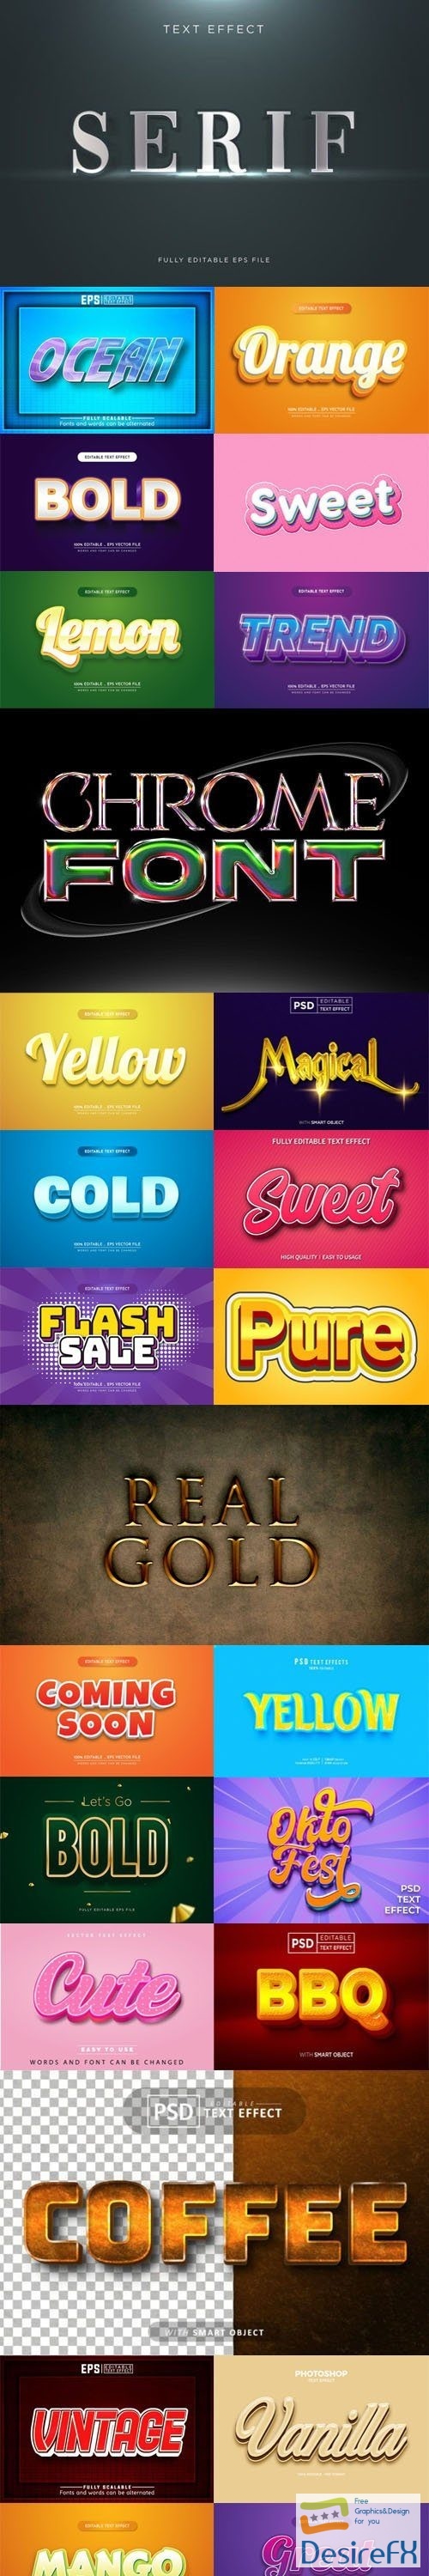 20+ Editable Text Effect & Styles for Photoshop & Illustrator